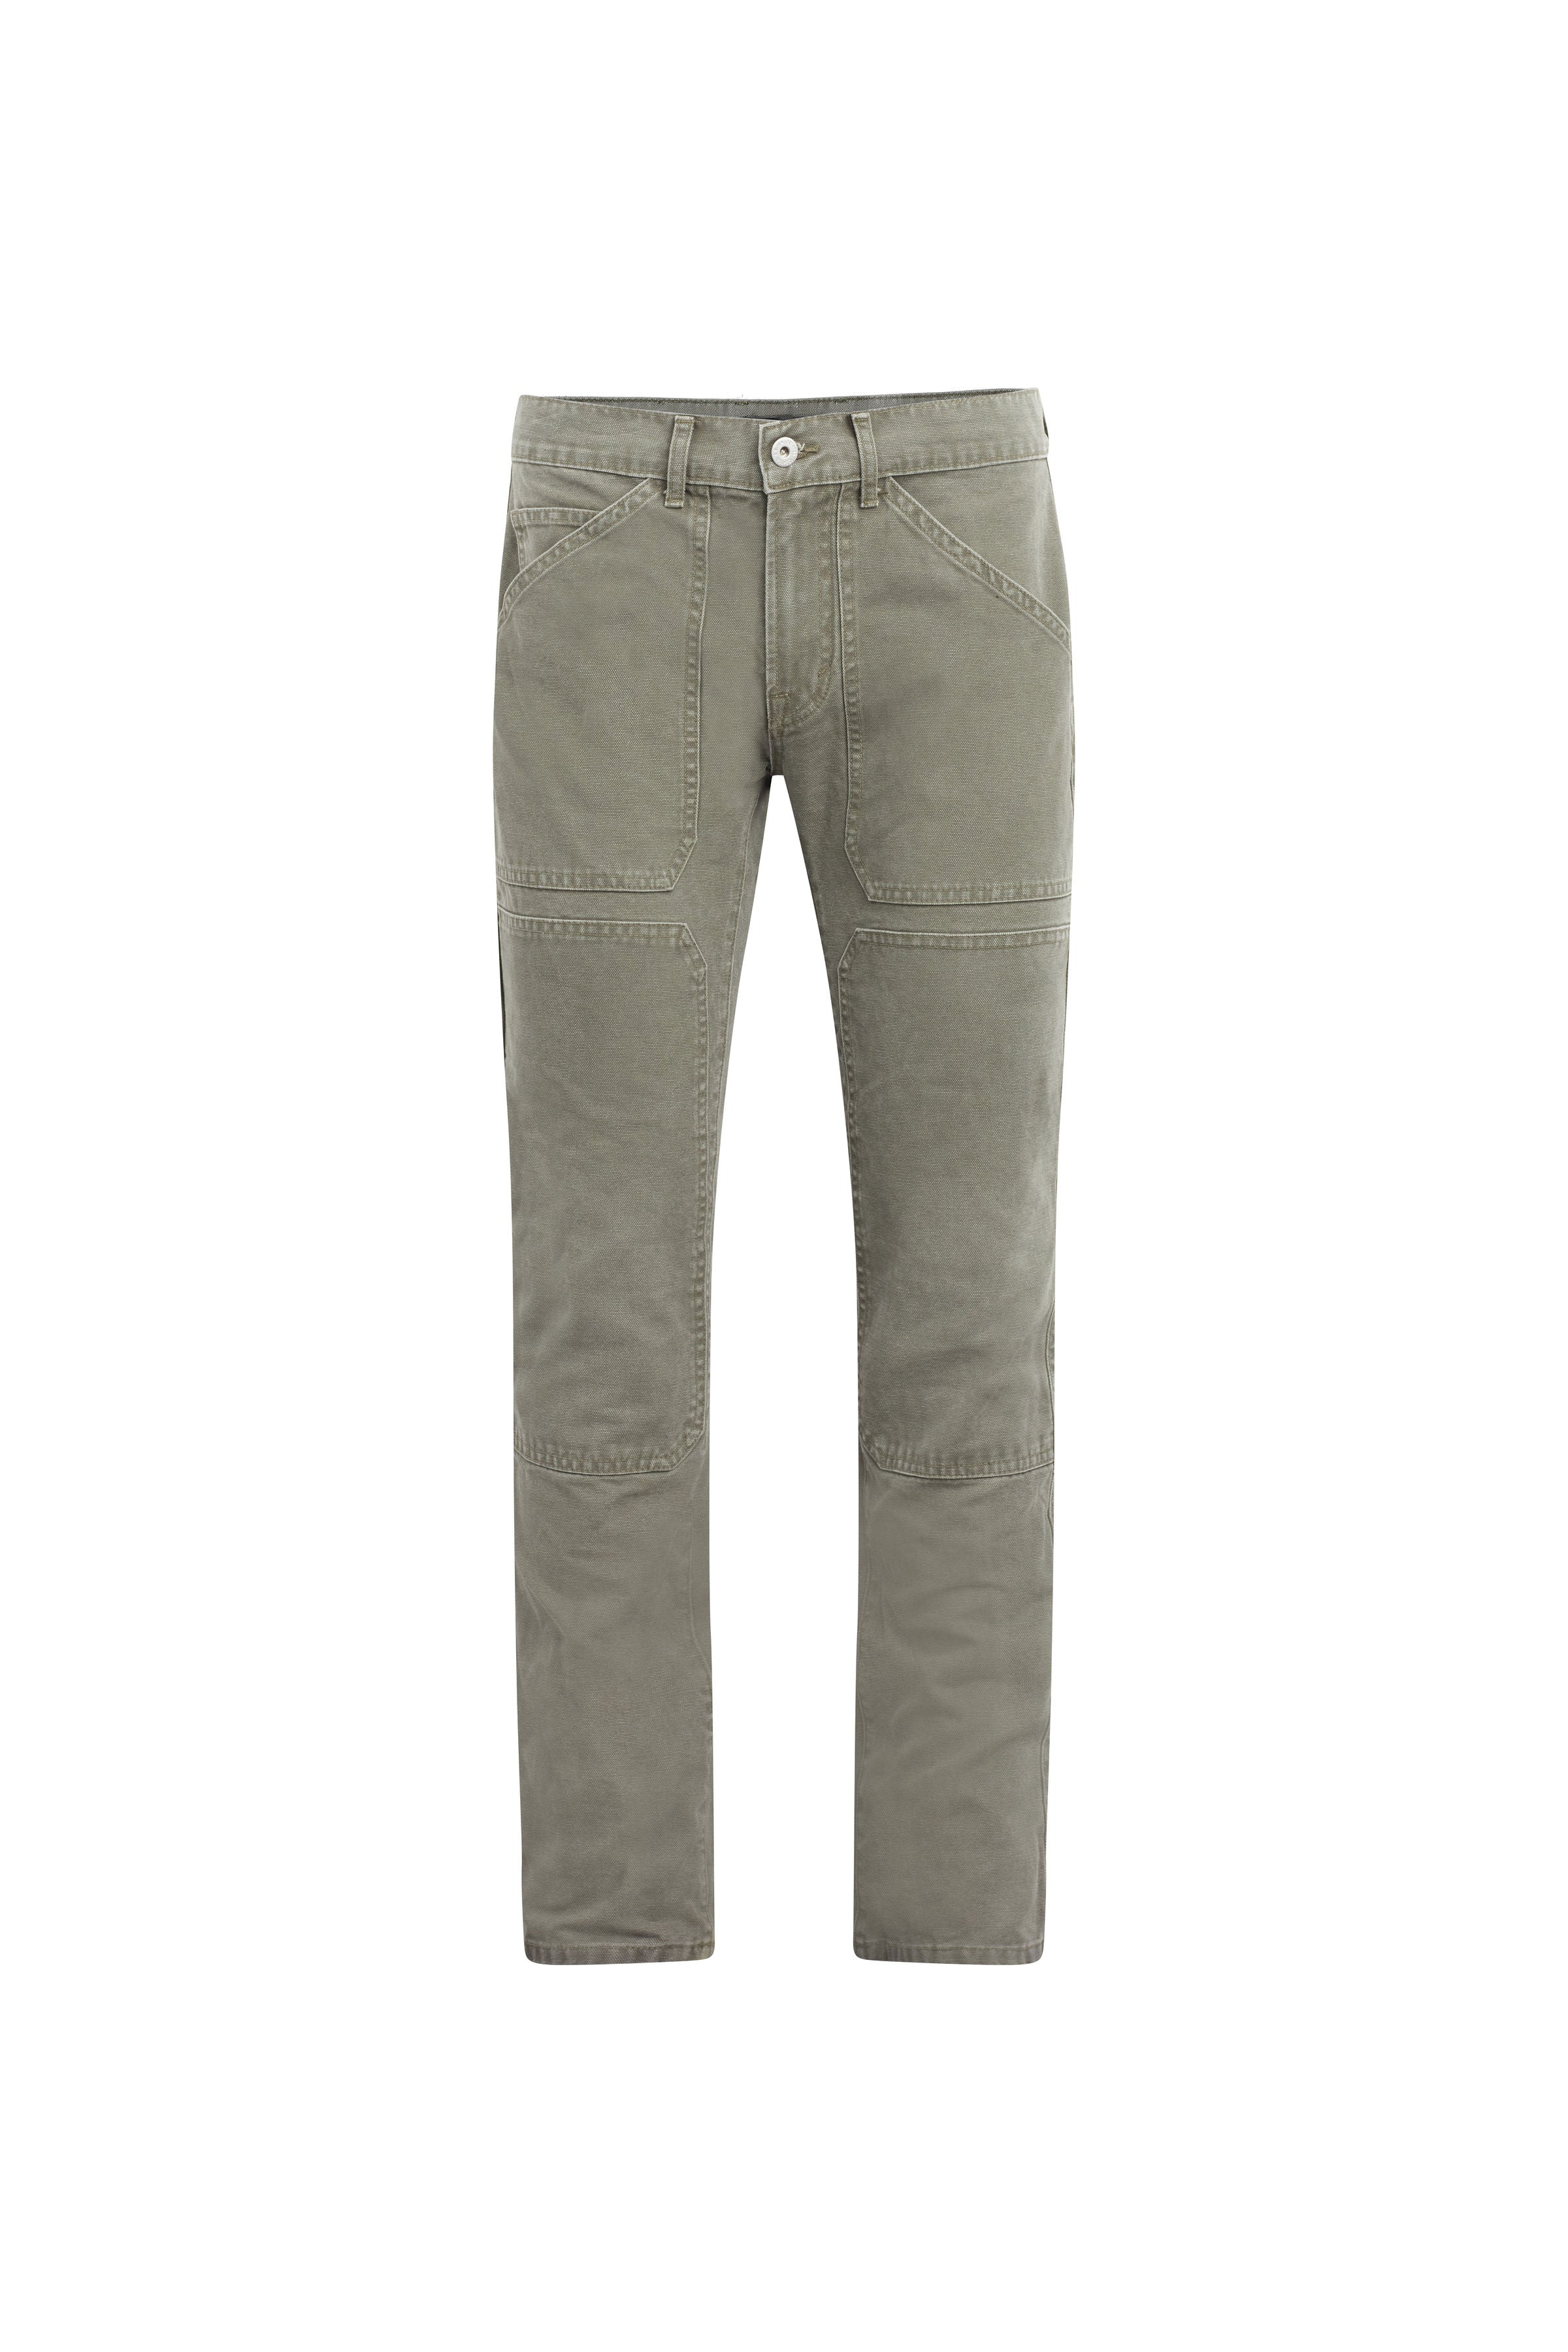 THE WILLIAMS PANT - ARMY GREEN